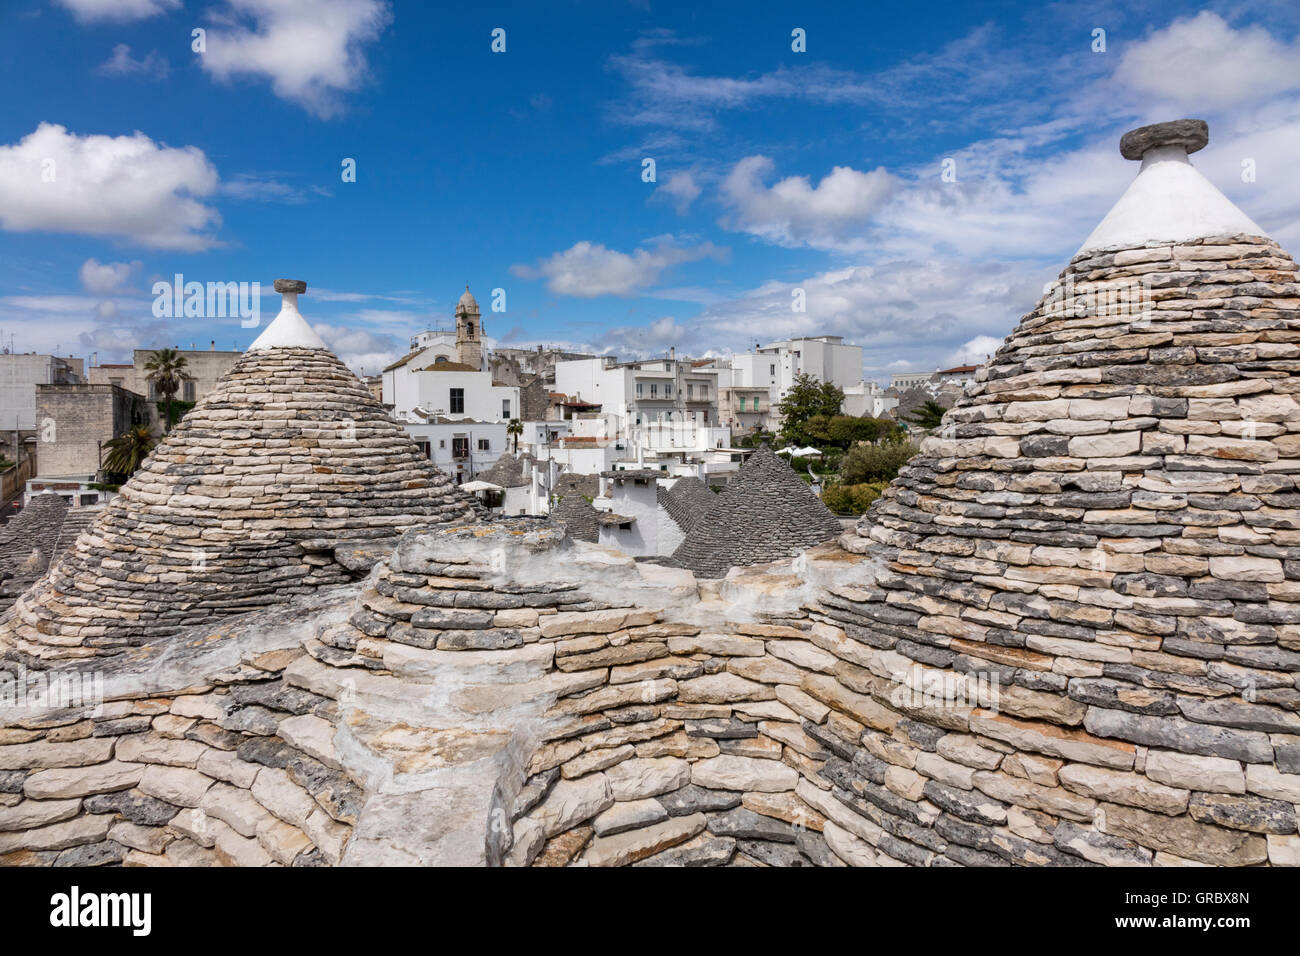 Trulli Roofs In The Foreground, Modern Part Of The City In The Background, Blue Sky, White Clouds, Alberobello, Province Bari, Apulia, Italy Stock Photo